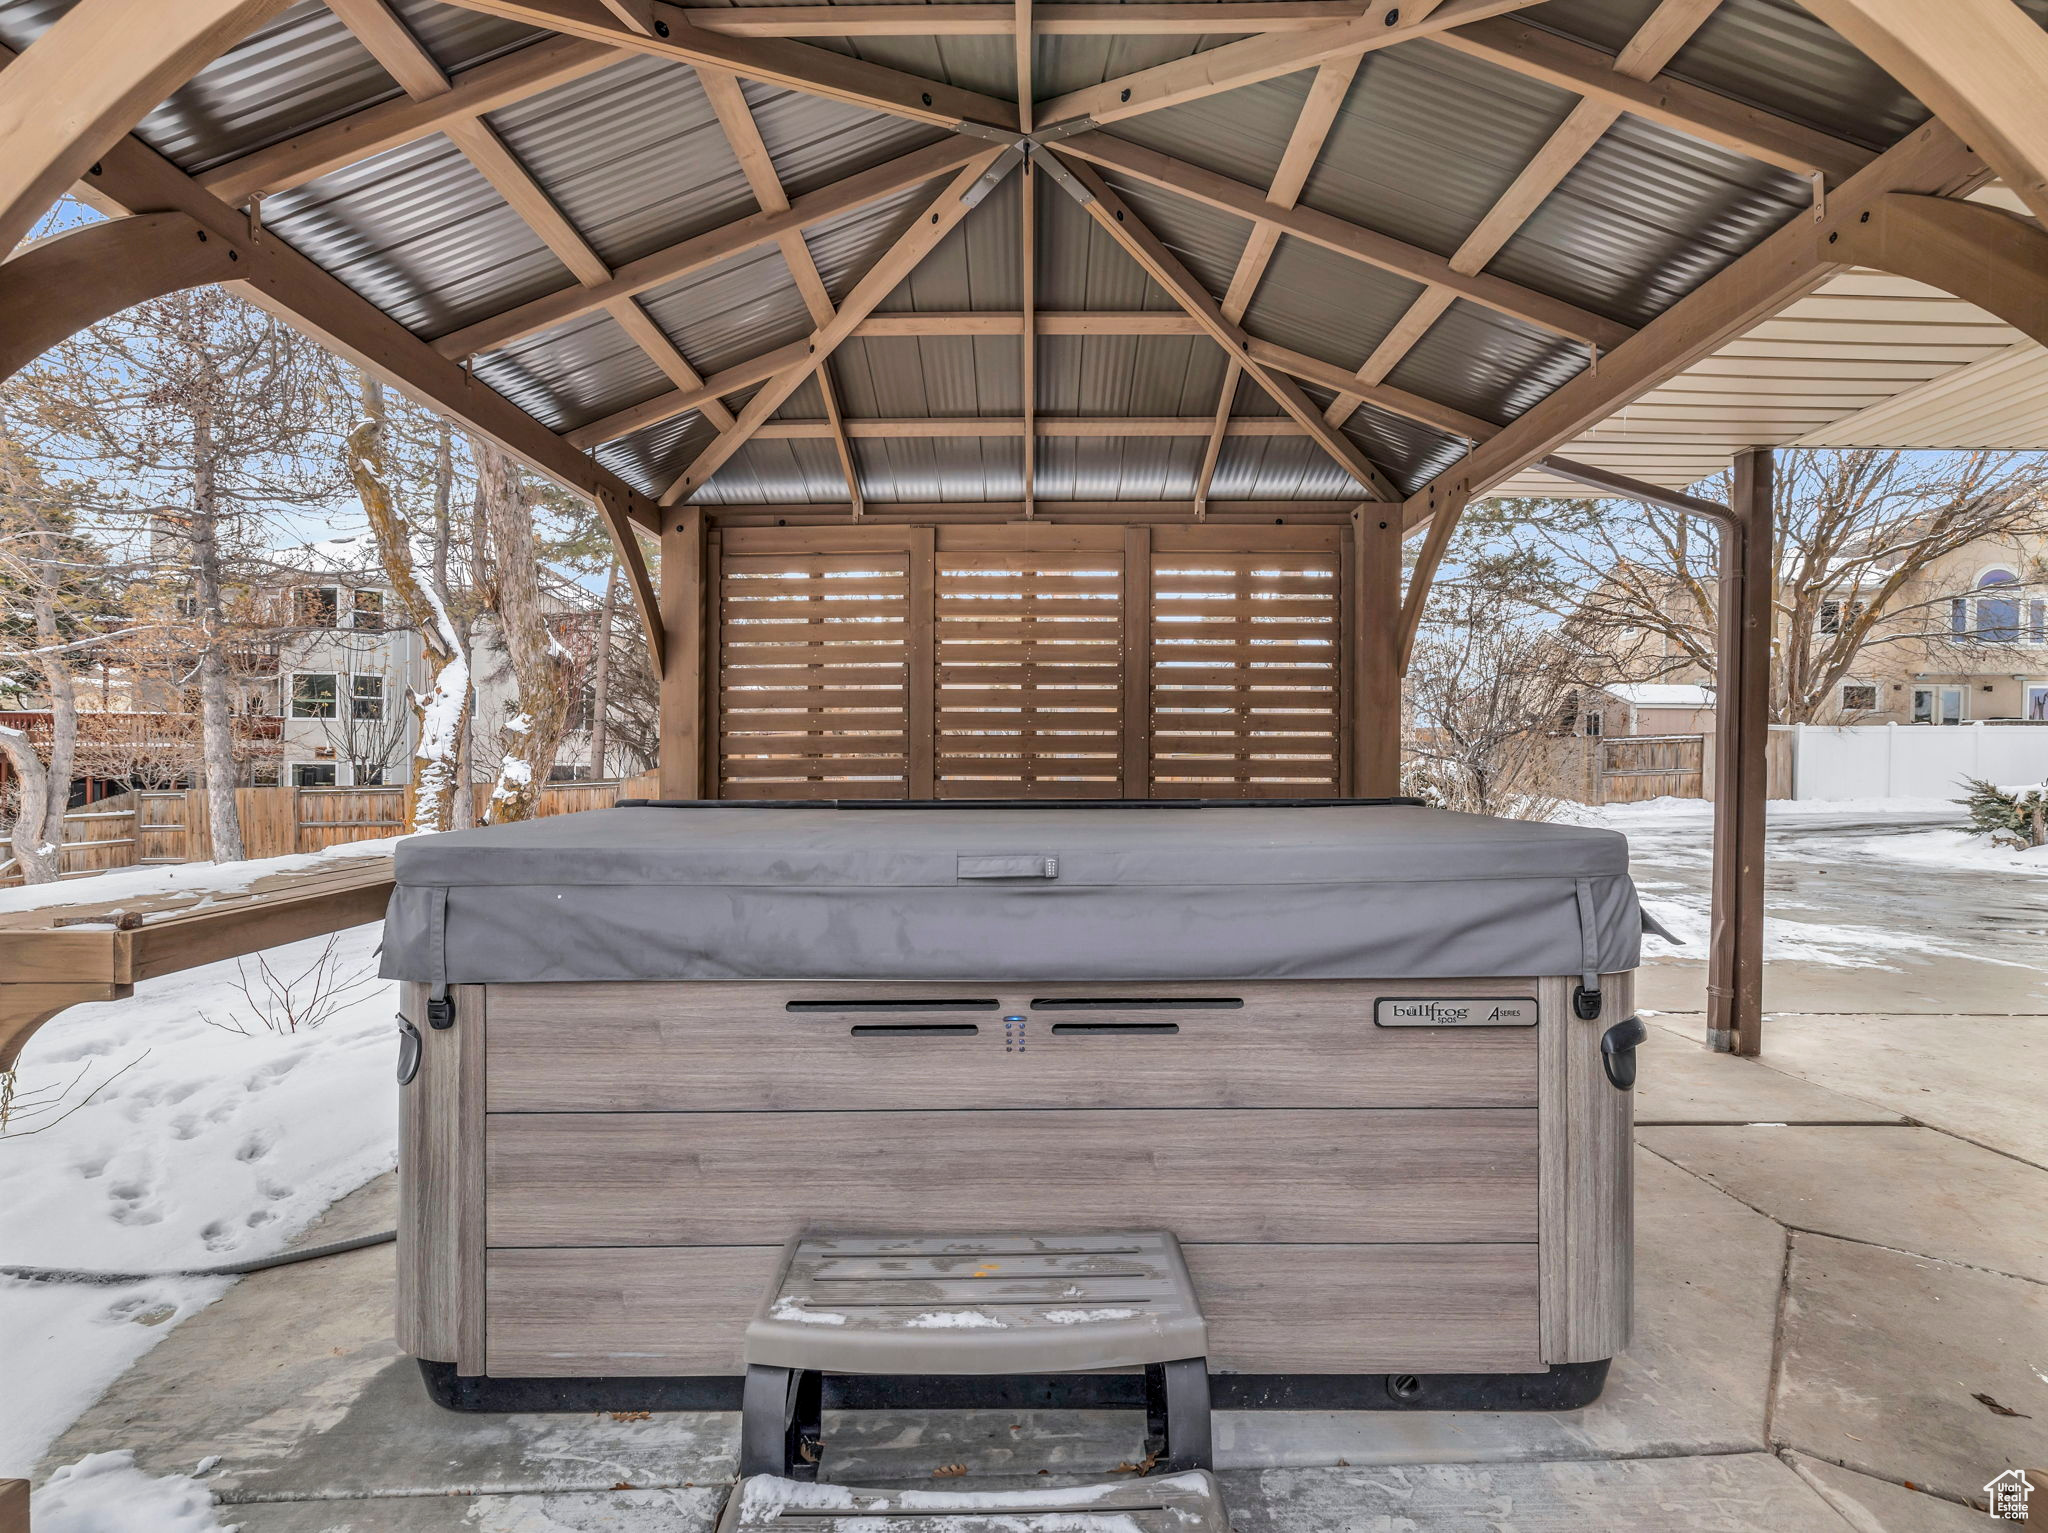 Snow covered patio featuring a gazebo and a hot tub (included in full price offer).